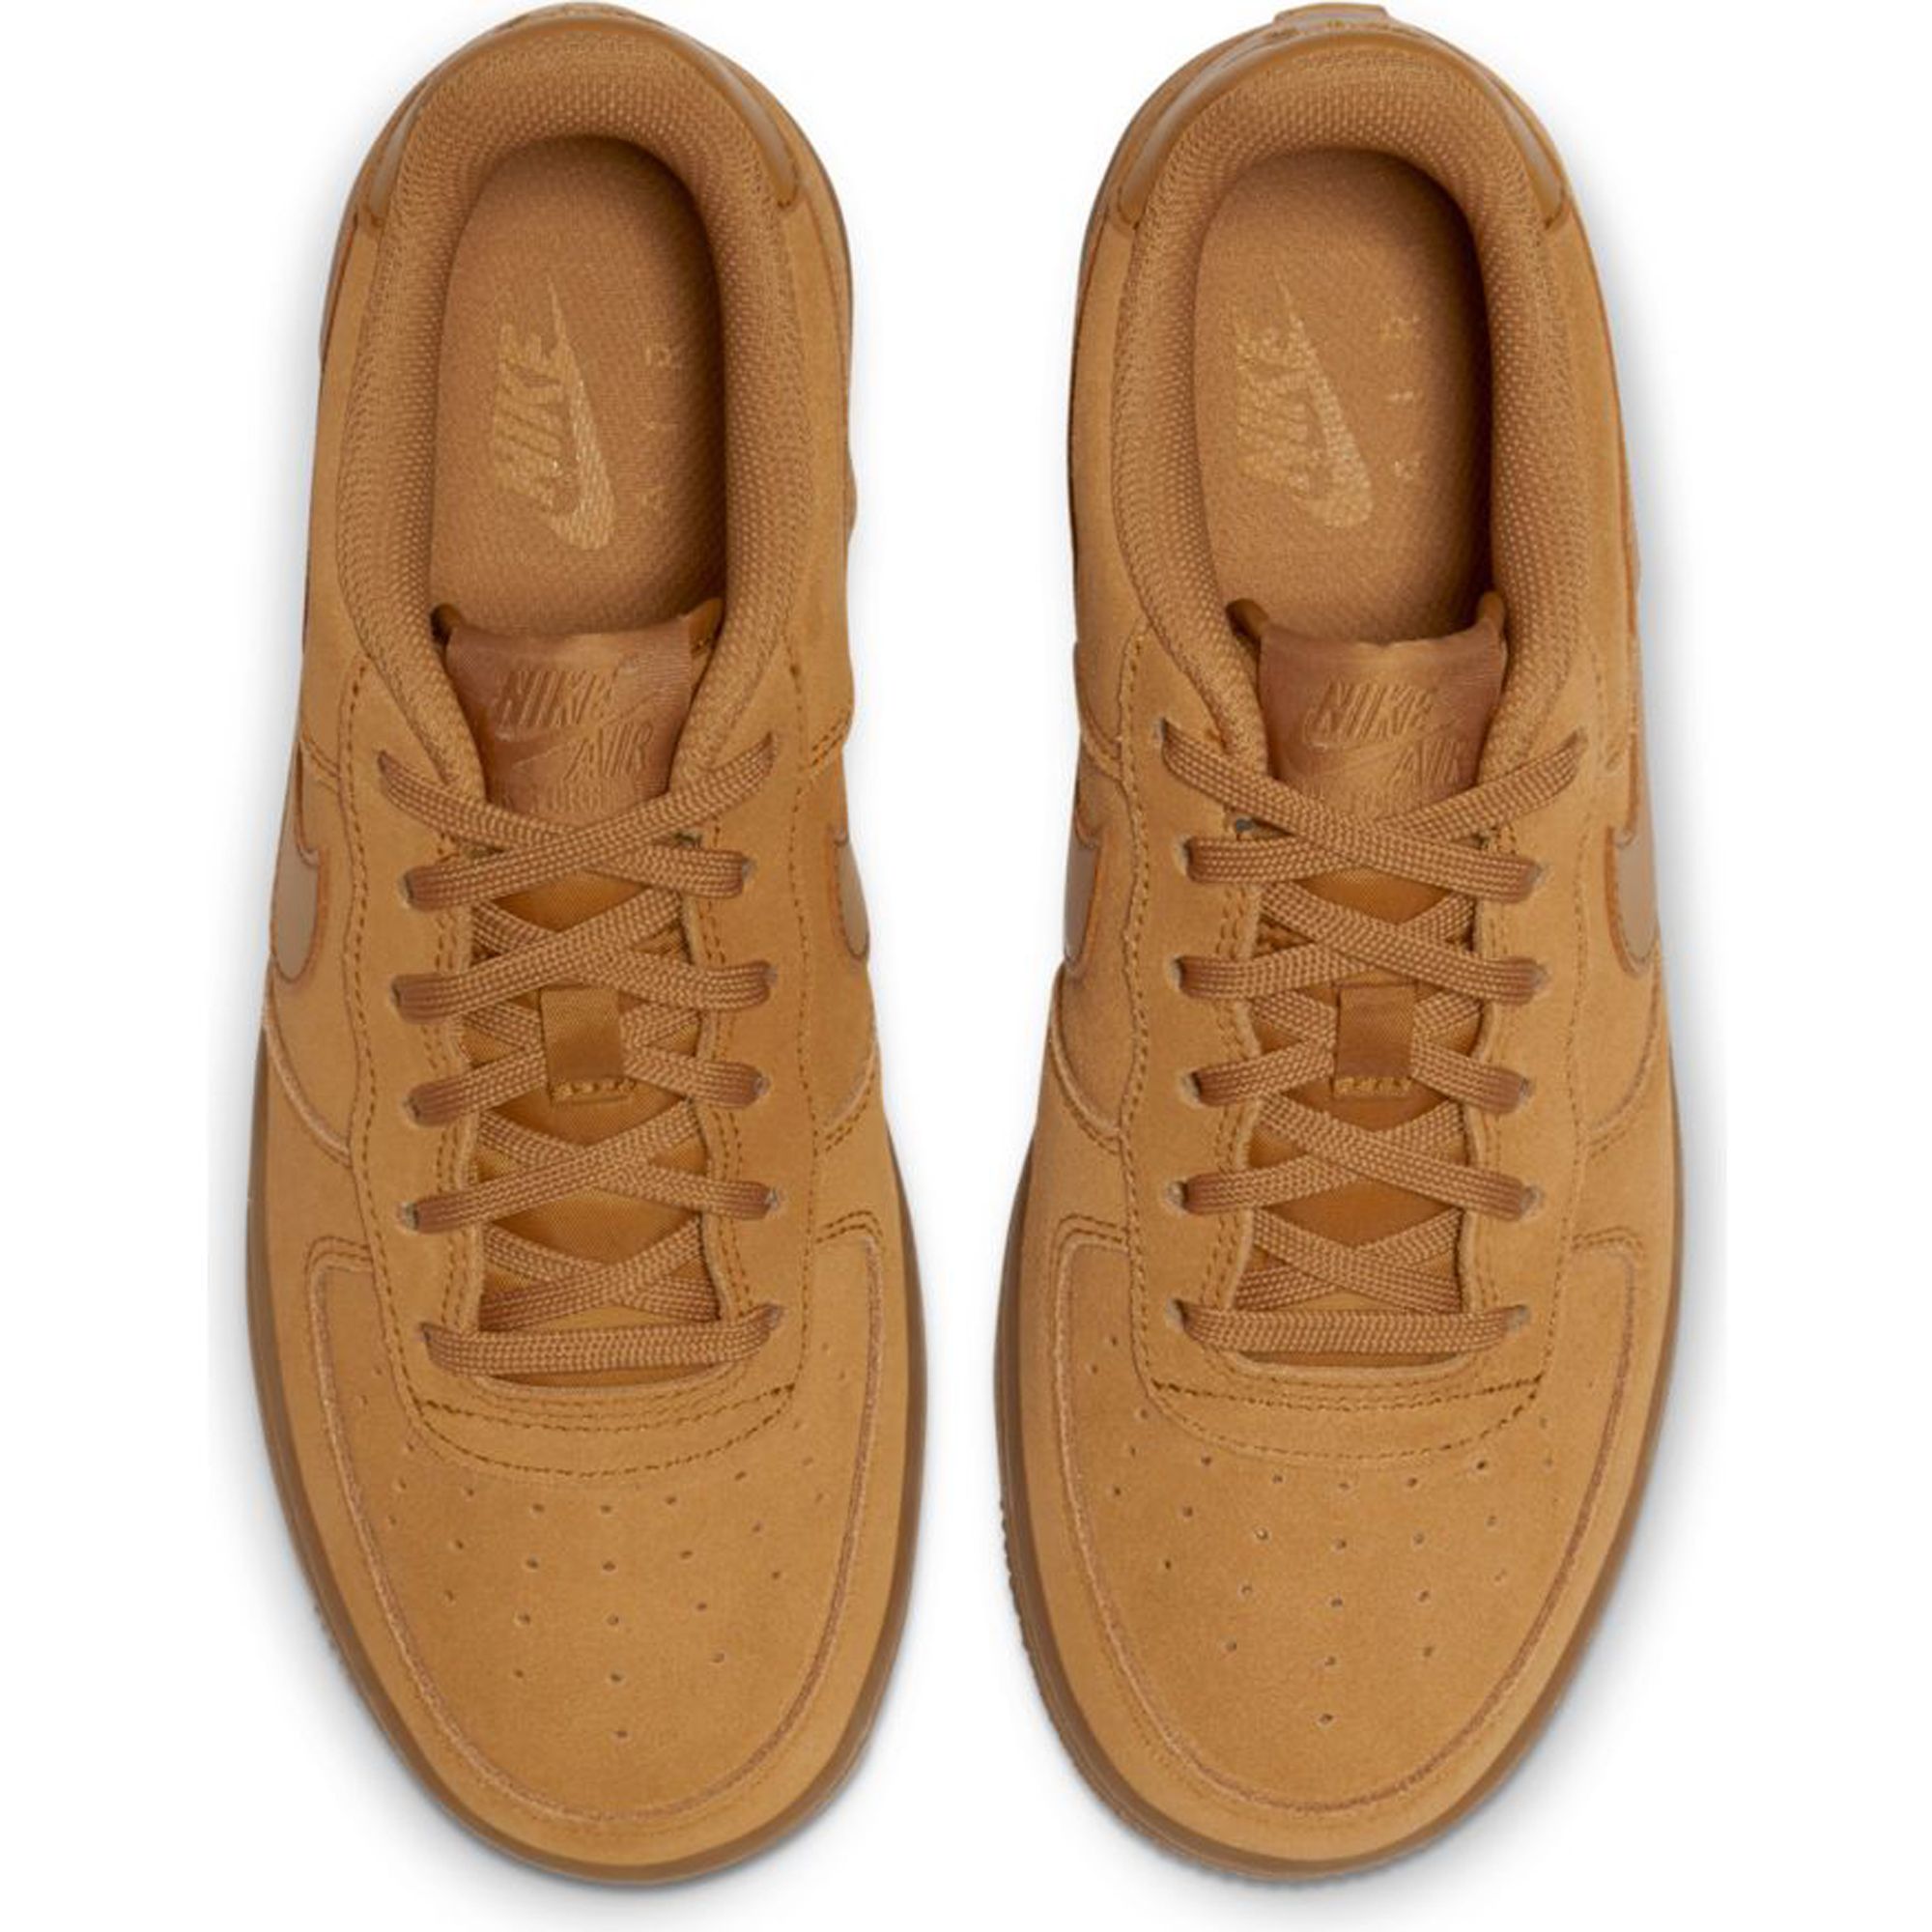 Nike Air Force 1 LV8 (TD) - Size 4C - Wheat/Gum Light Brown - NEW